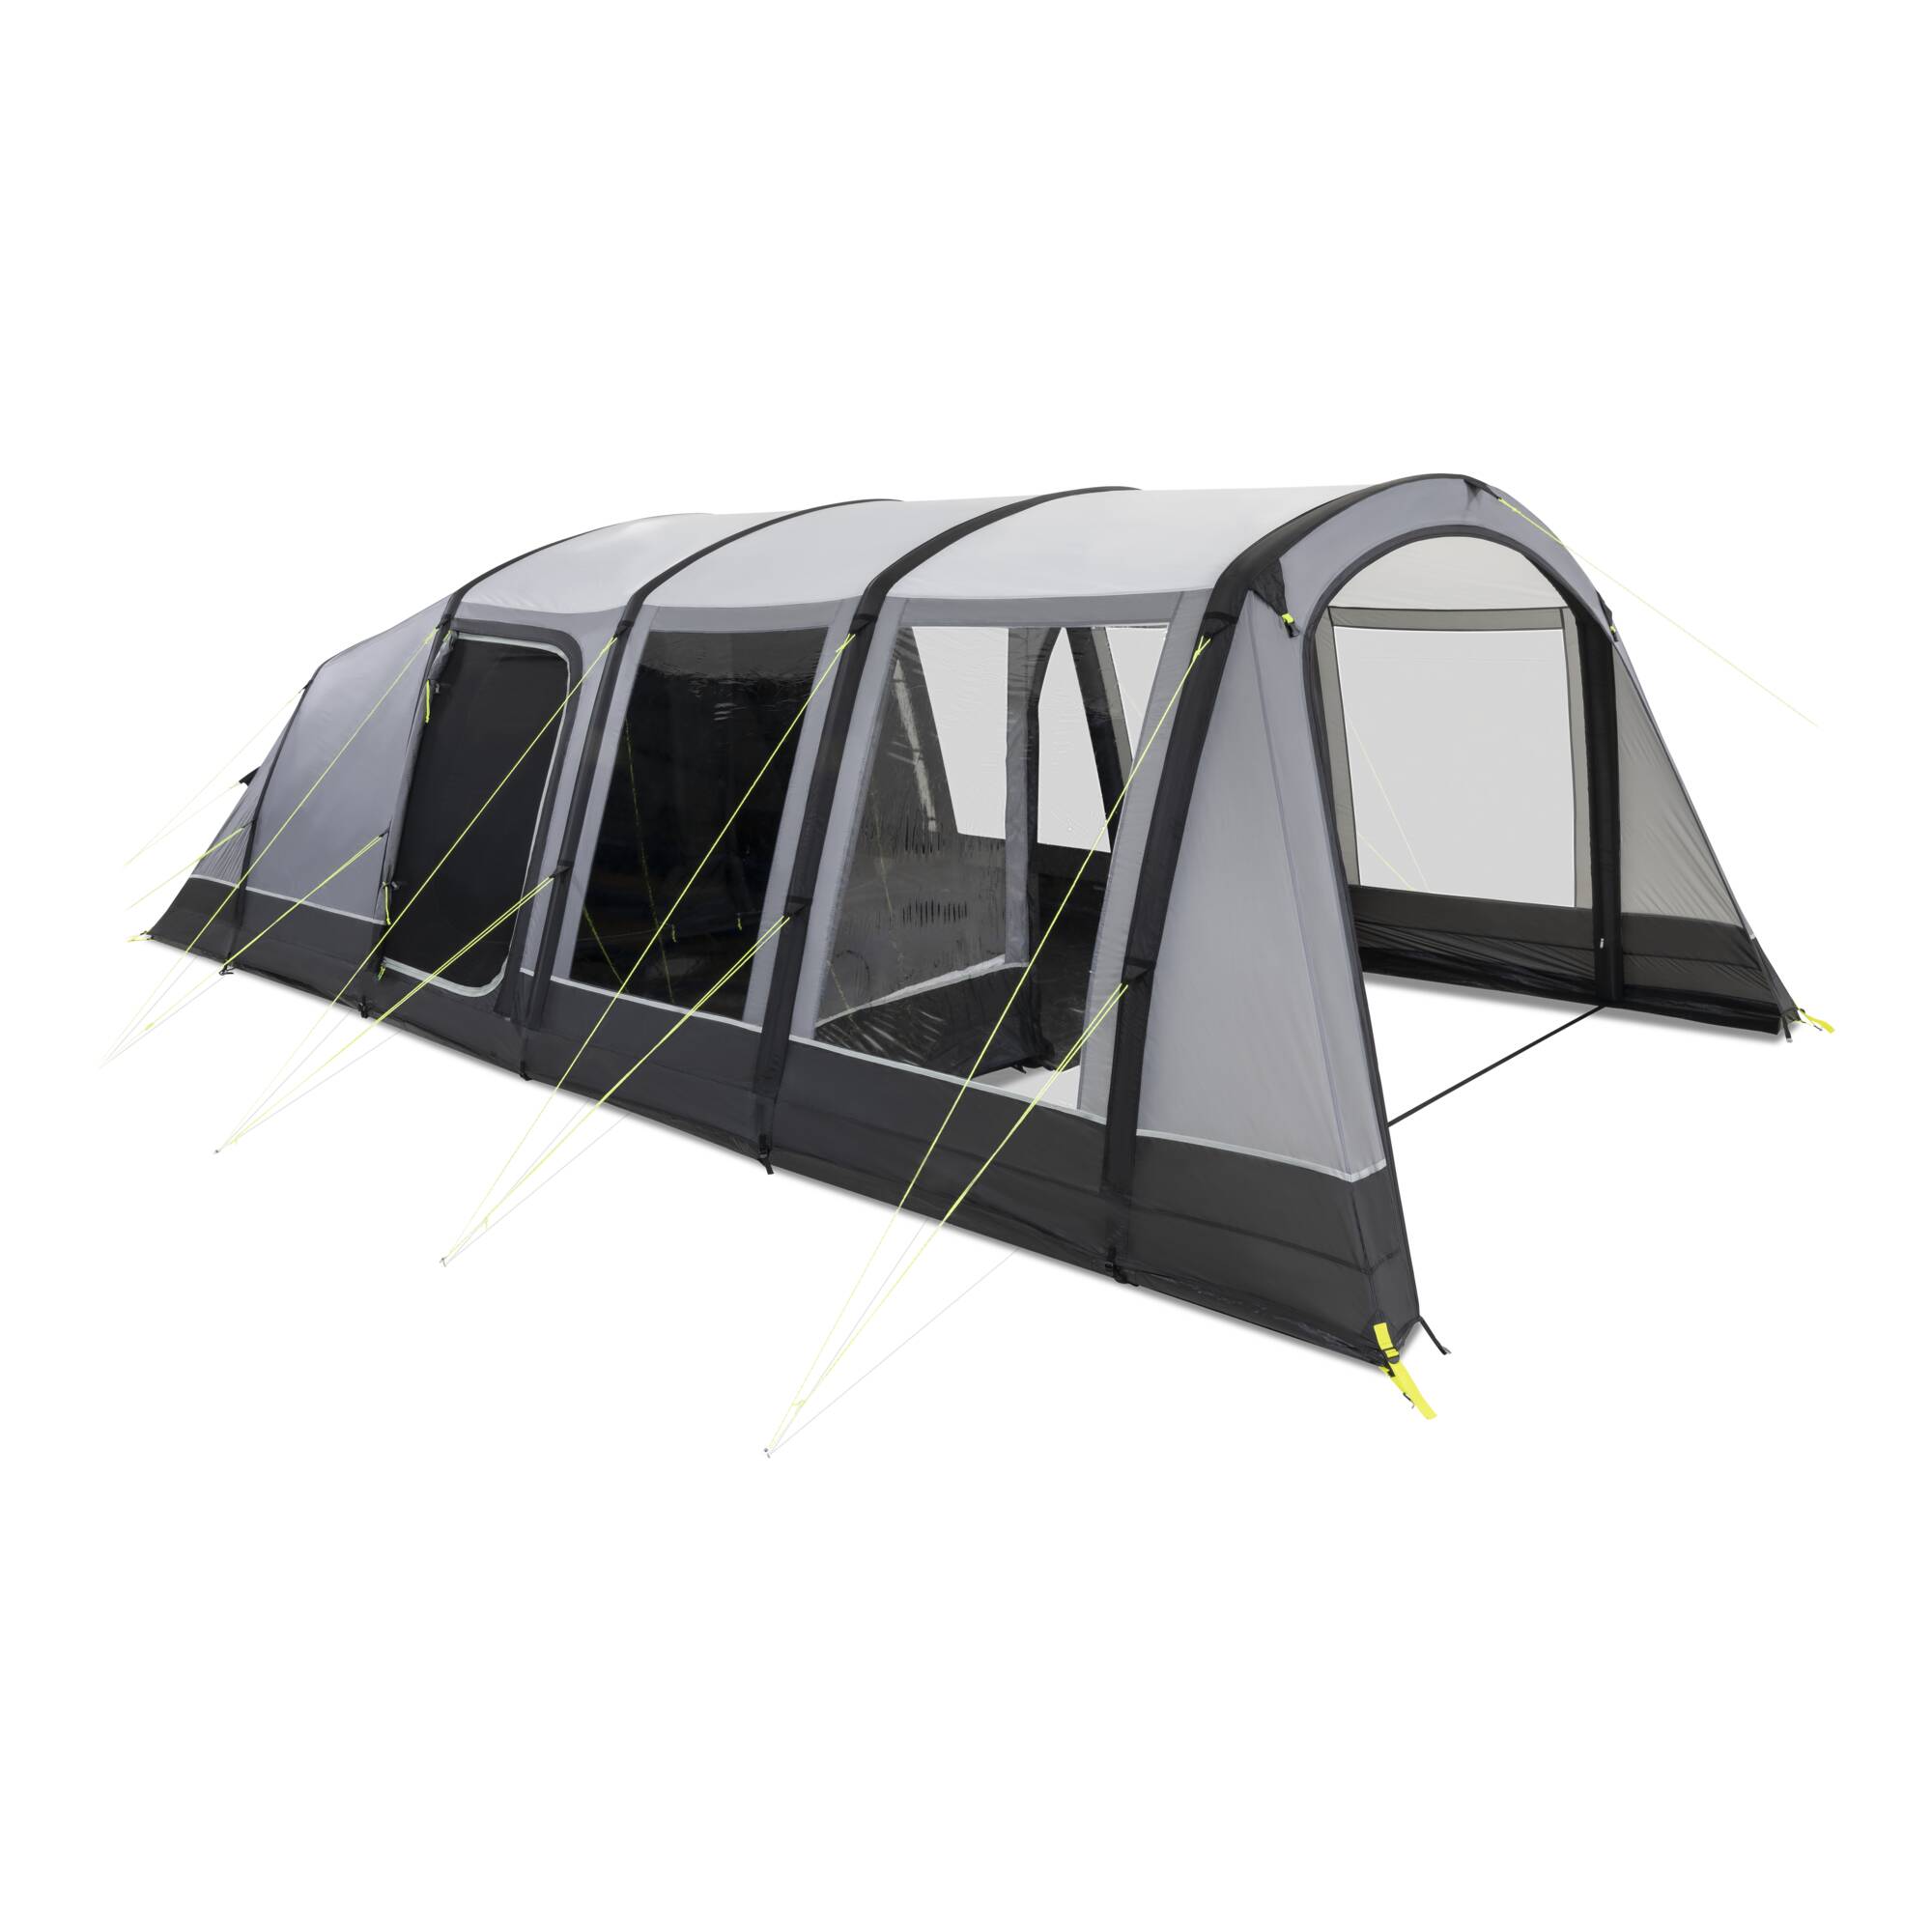 Dometic Hayling 6 Tent Spare Parts